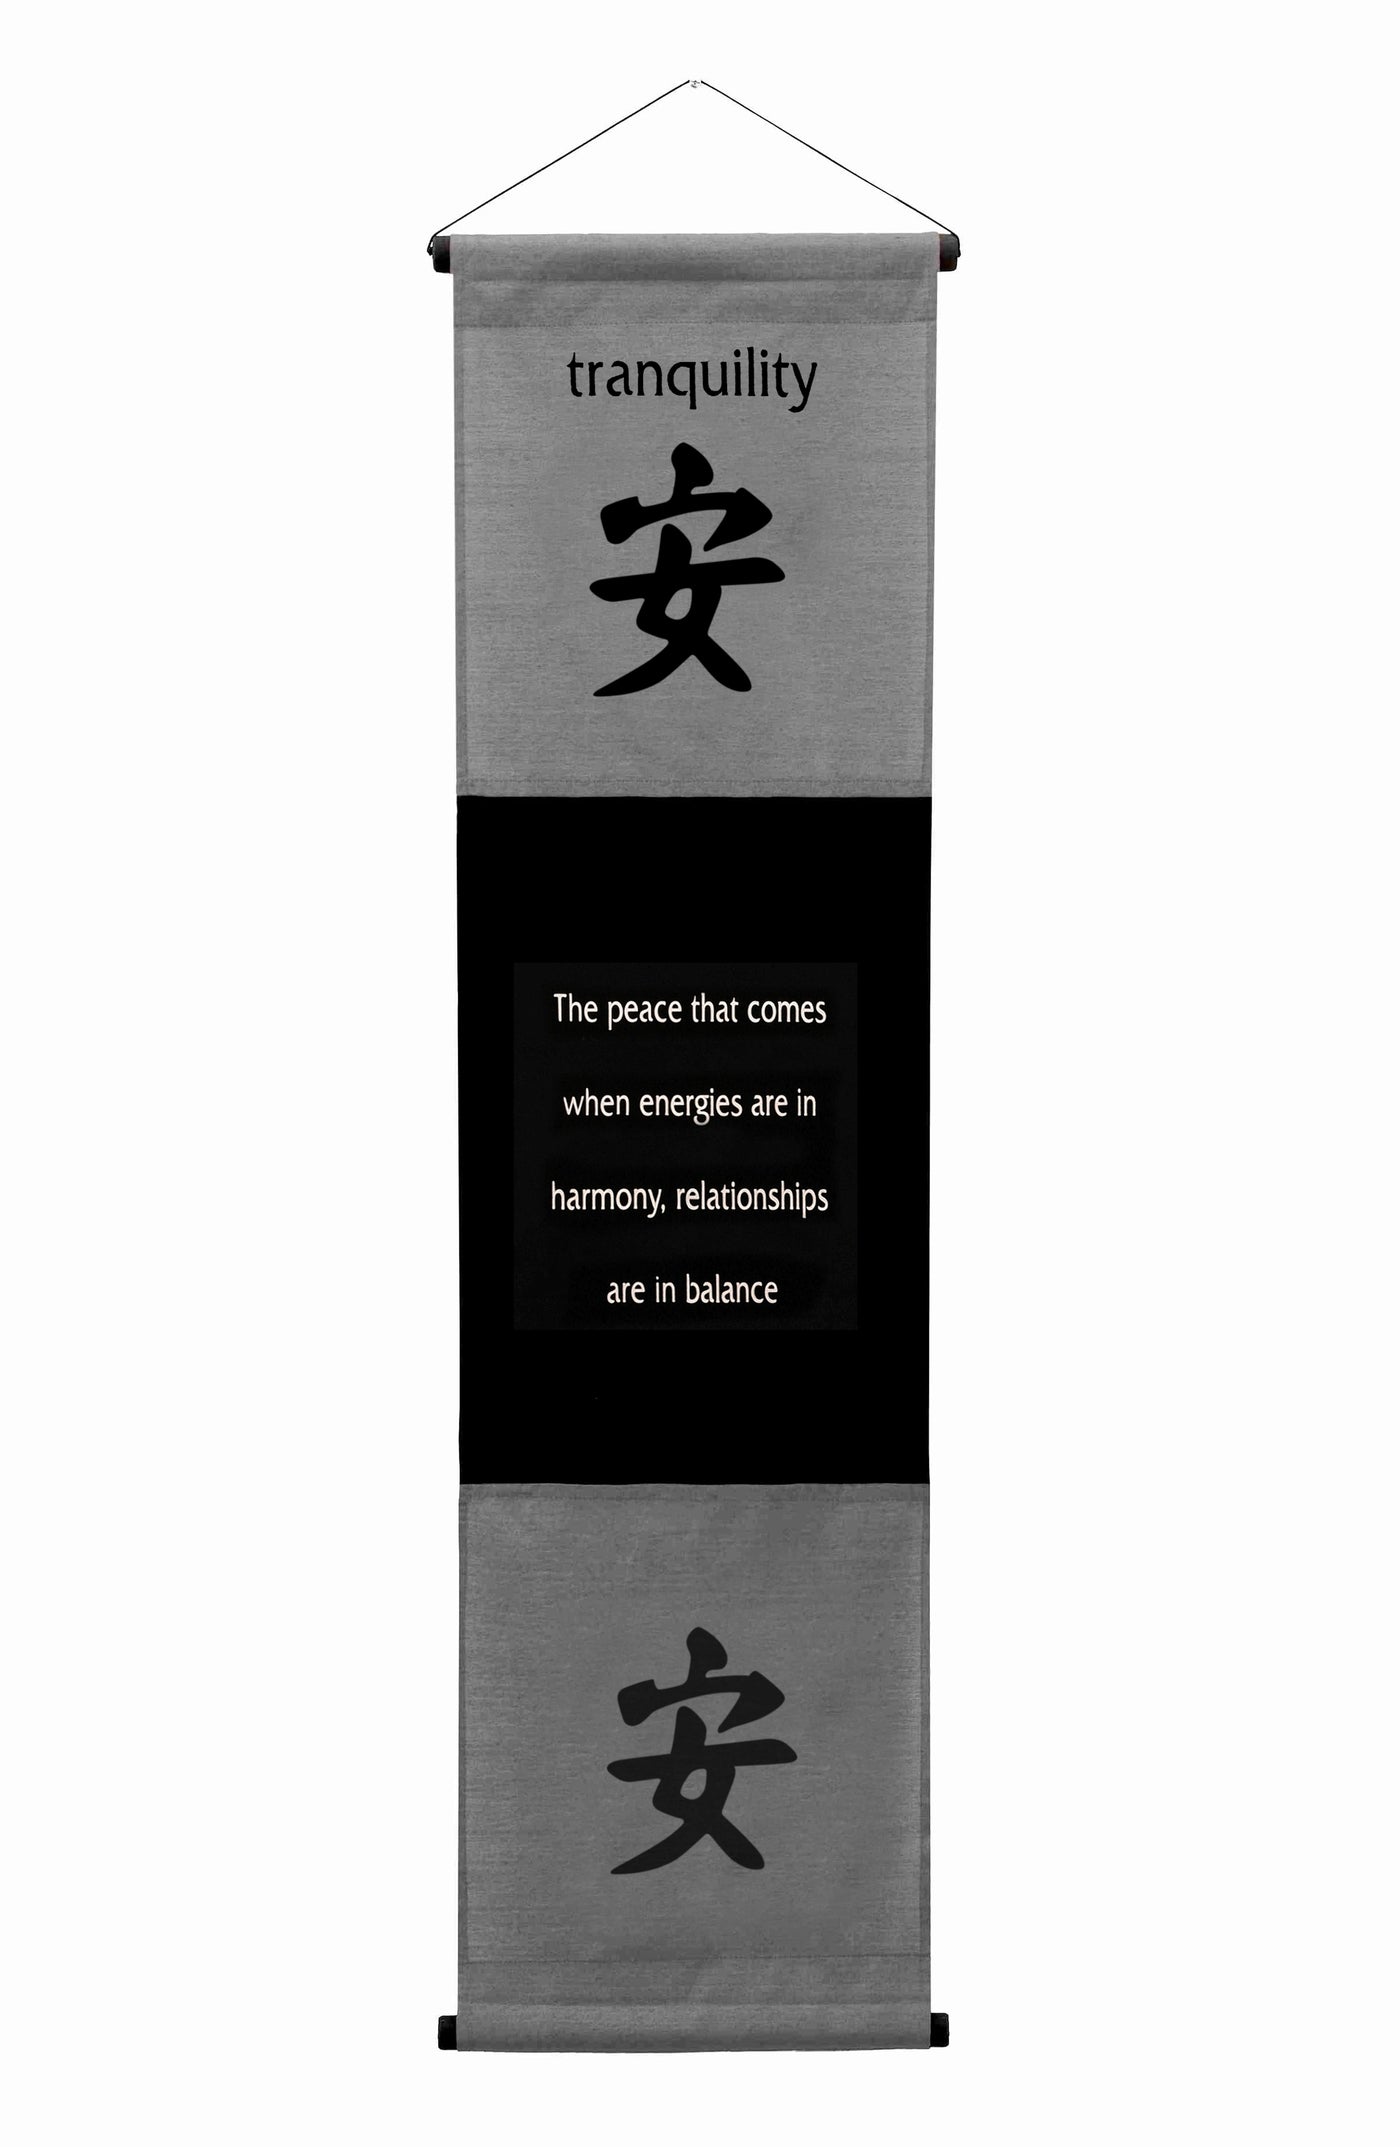 Inspirational Wall Decor Tranquility Banner Art, Inspiring Quote Hanging Scroll, Affirmation Motivational Uplifting Message, Thought Saying Tapestry